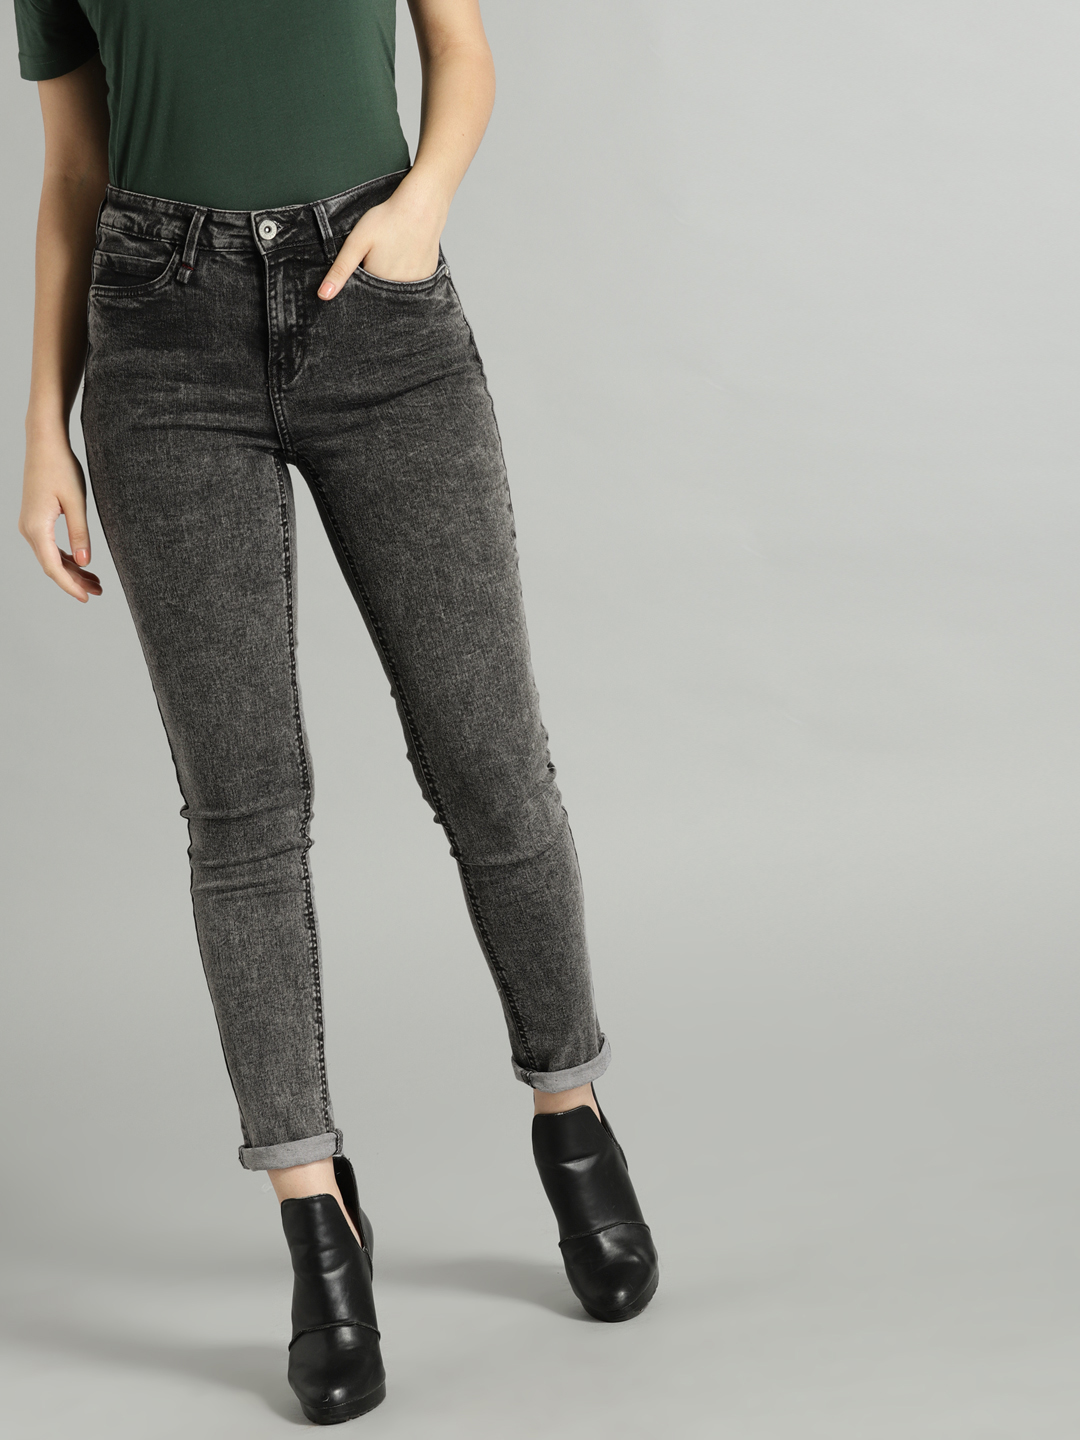 Roadster Women Black Slim Fit Mid-Rise Clean Look Stretchable Jeans Price in India